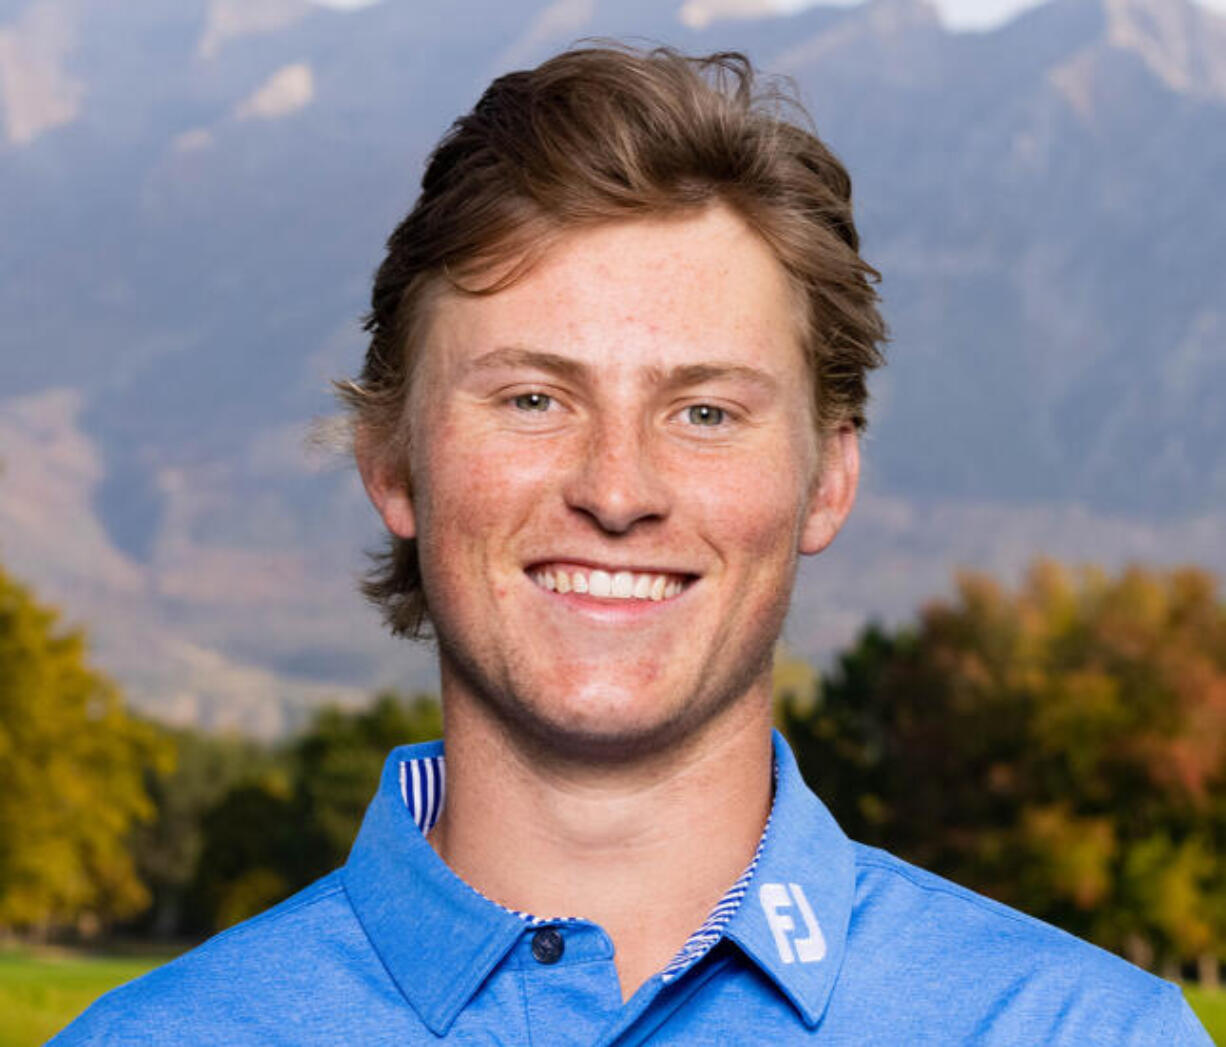 Zac Jones just completed his freshman season on the Brigham Young University golf team.